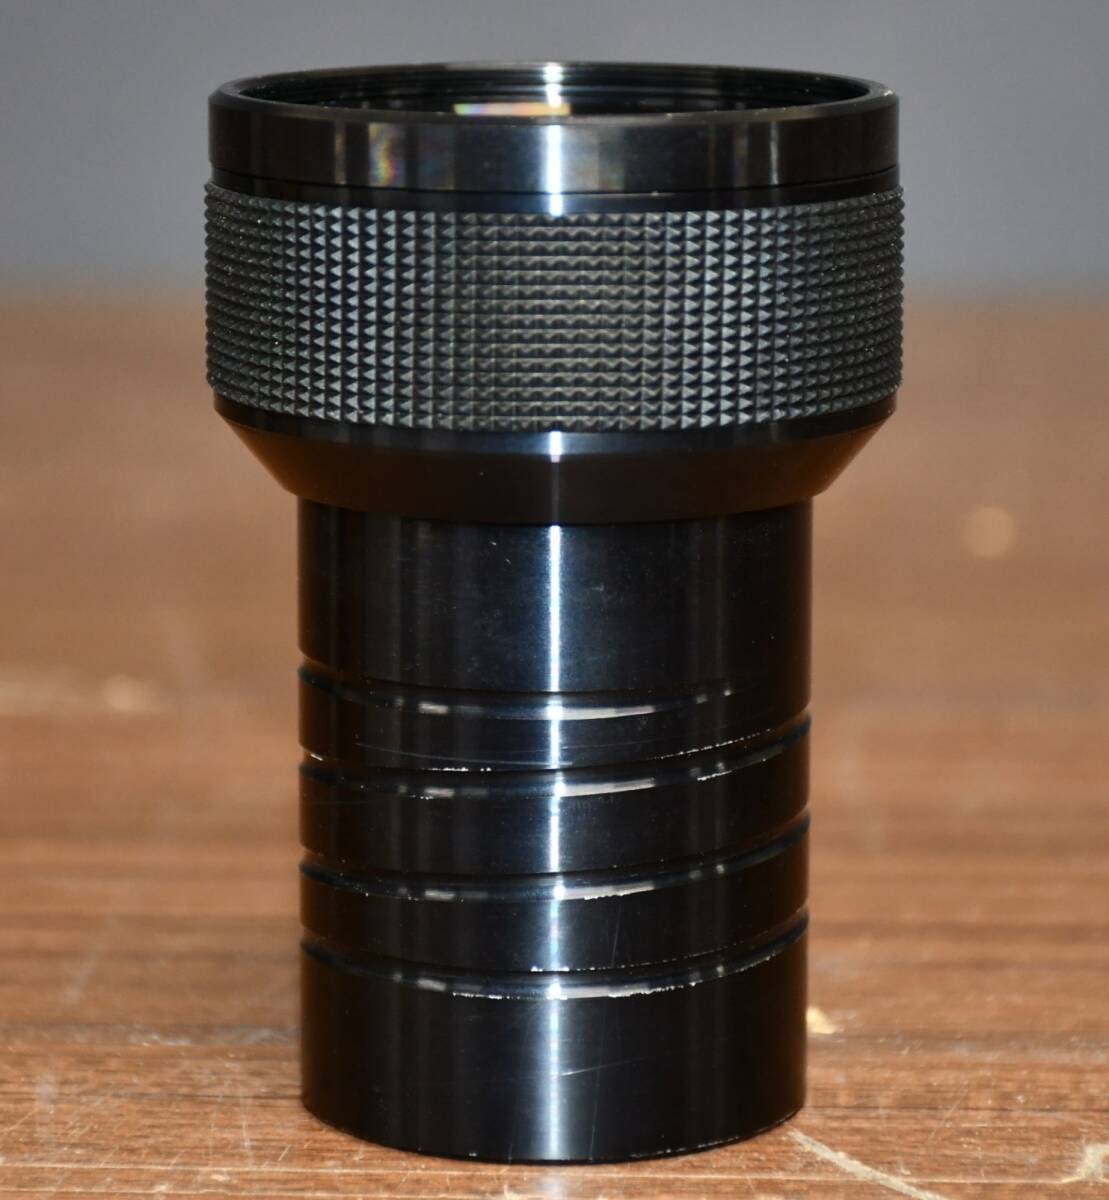 OY3-34[ present condition goods ] Elmo Pro je comb .nELMO PROJECTION LENS 1:2.8 F=140mm exclusive use case attaching l camera lens * optics equipment l long-term keeping goods 